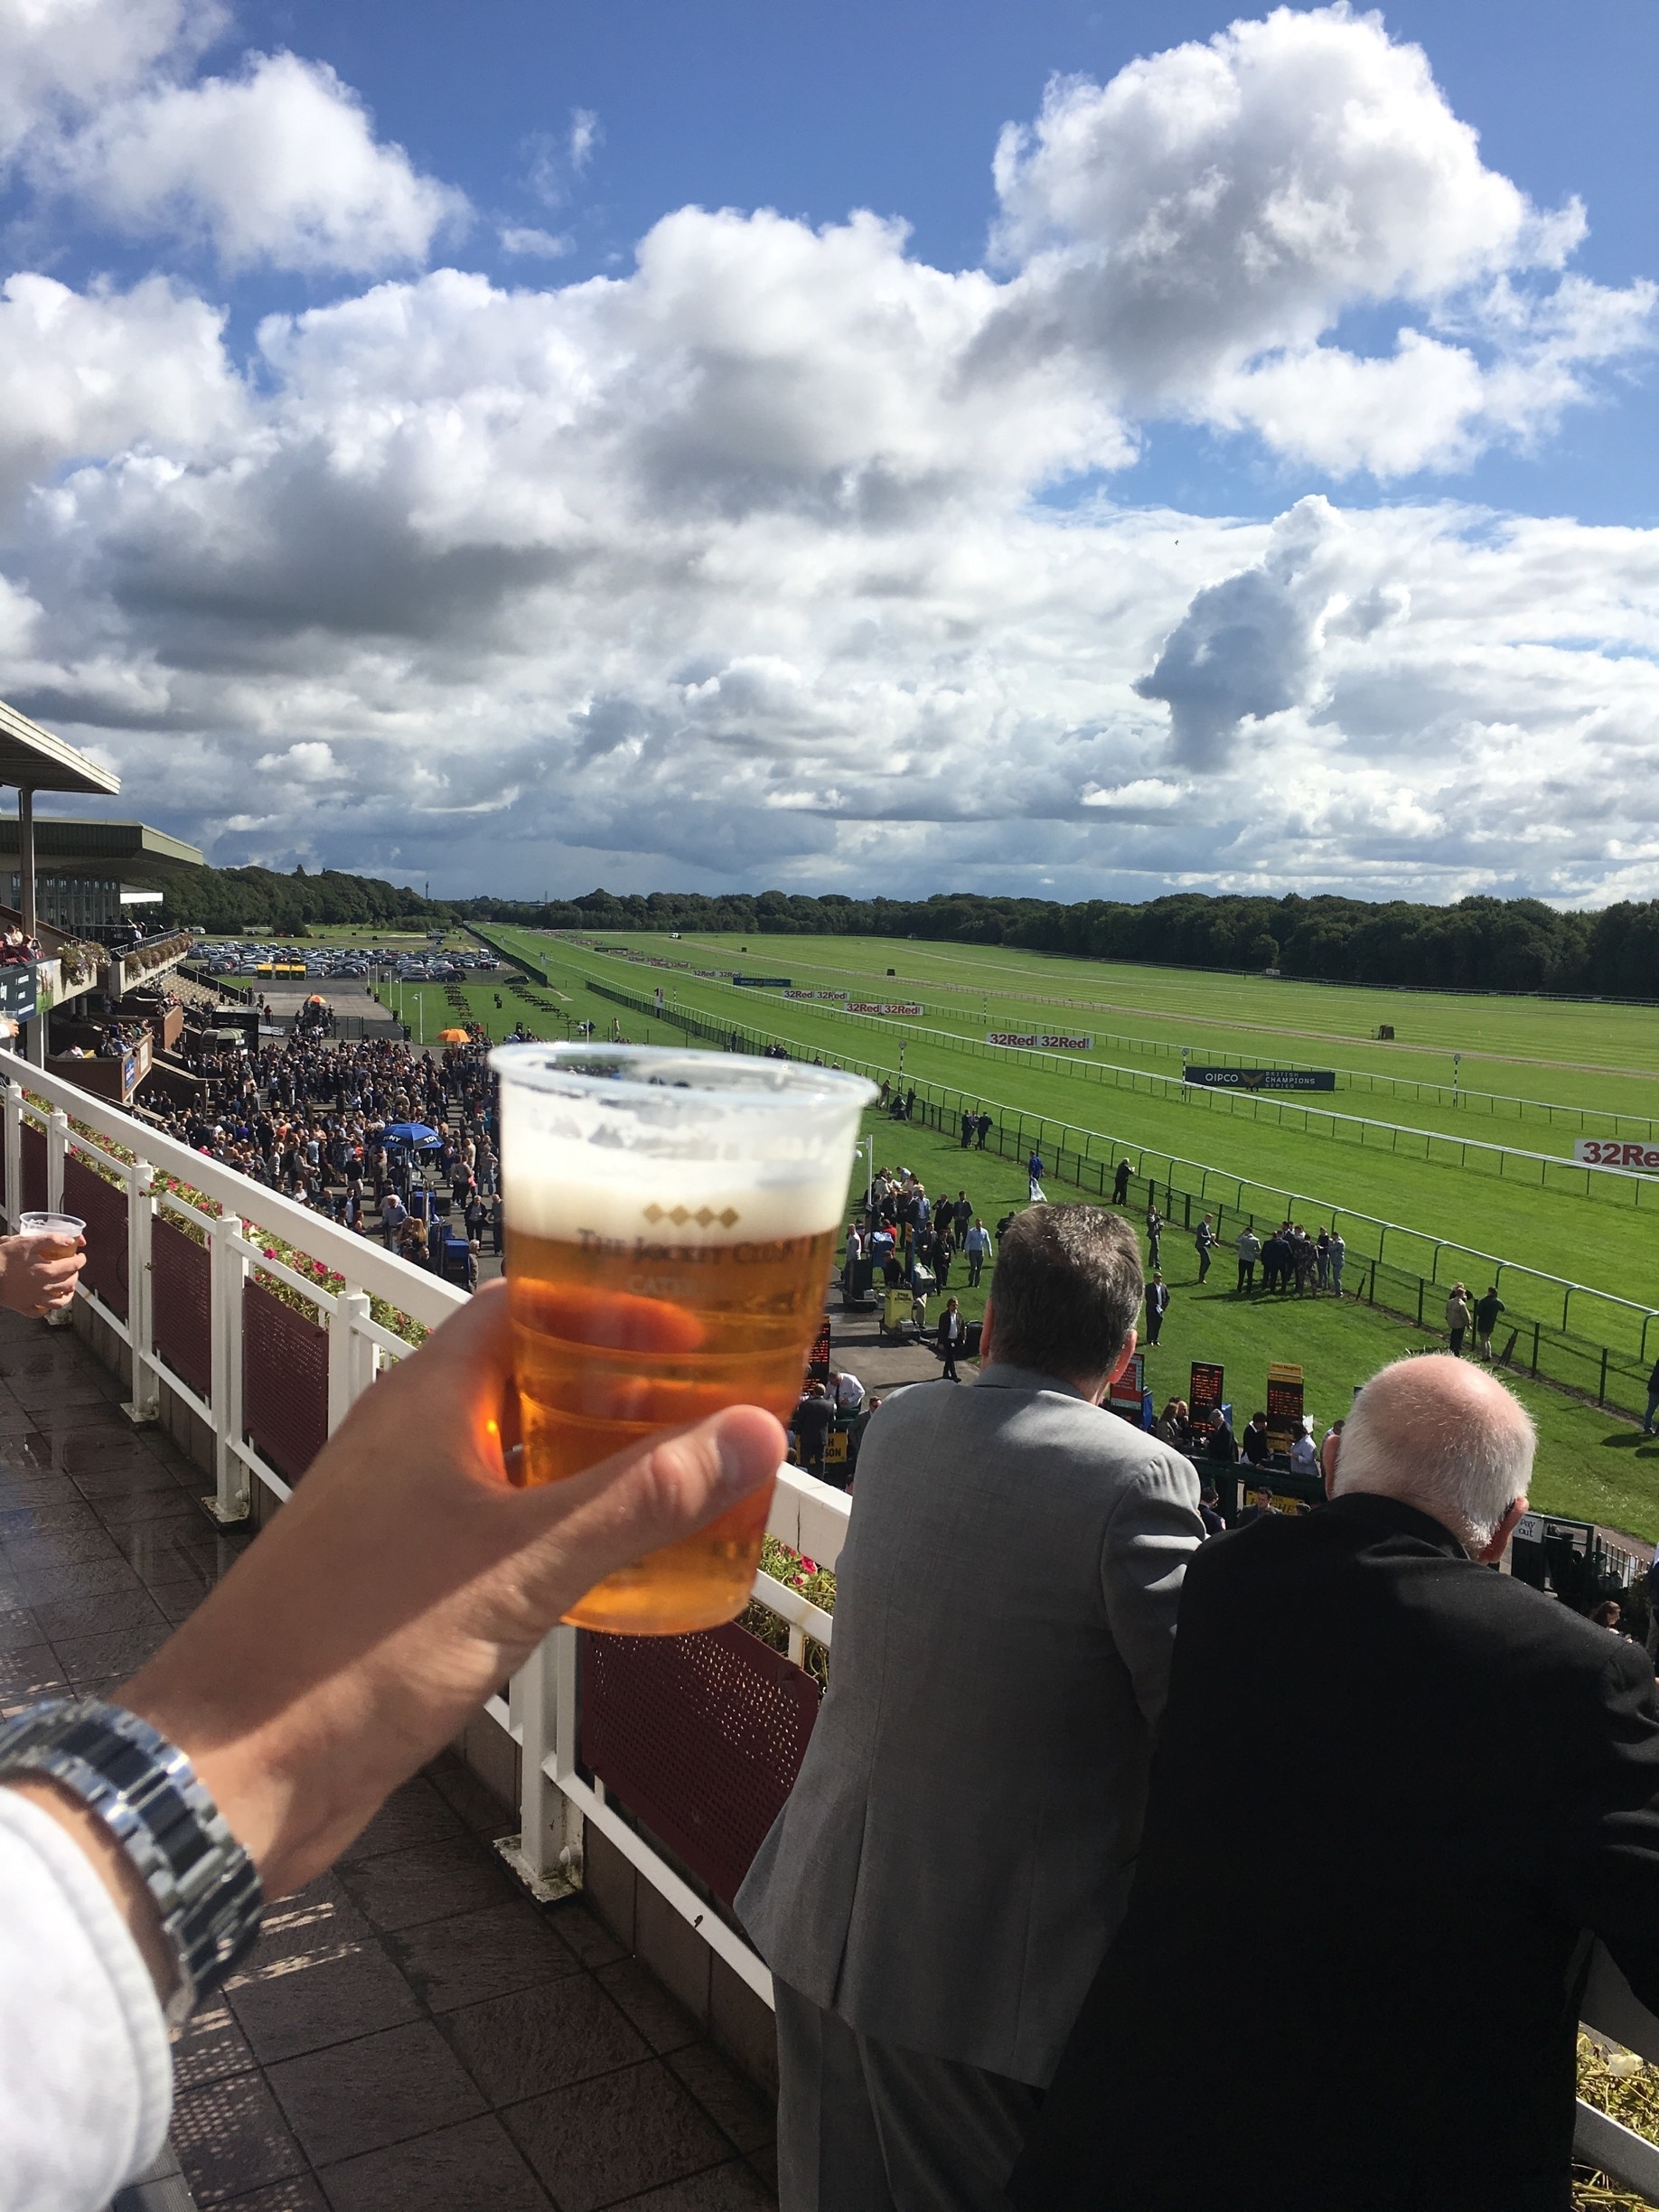 The local racecourse, Class day out!!